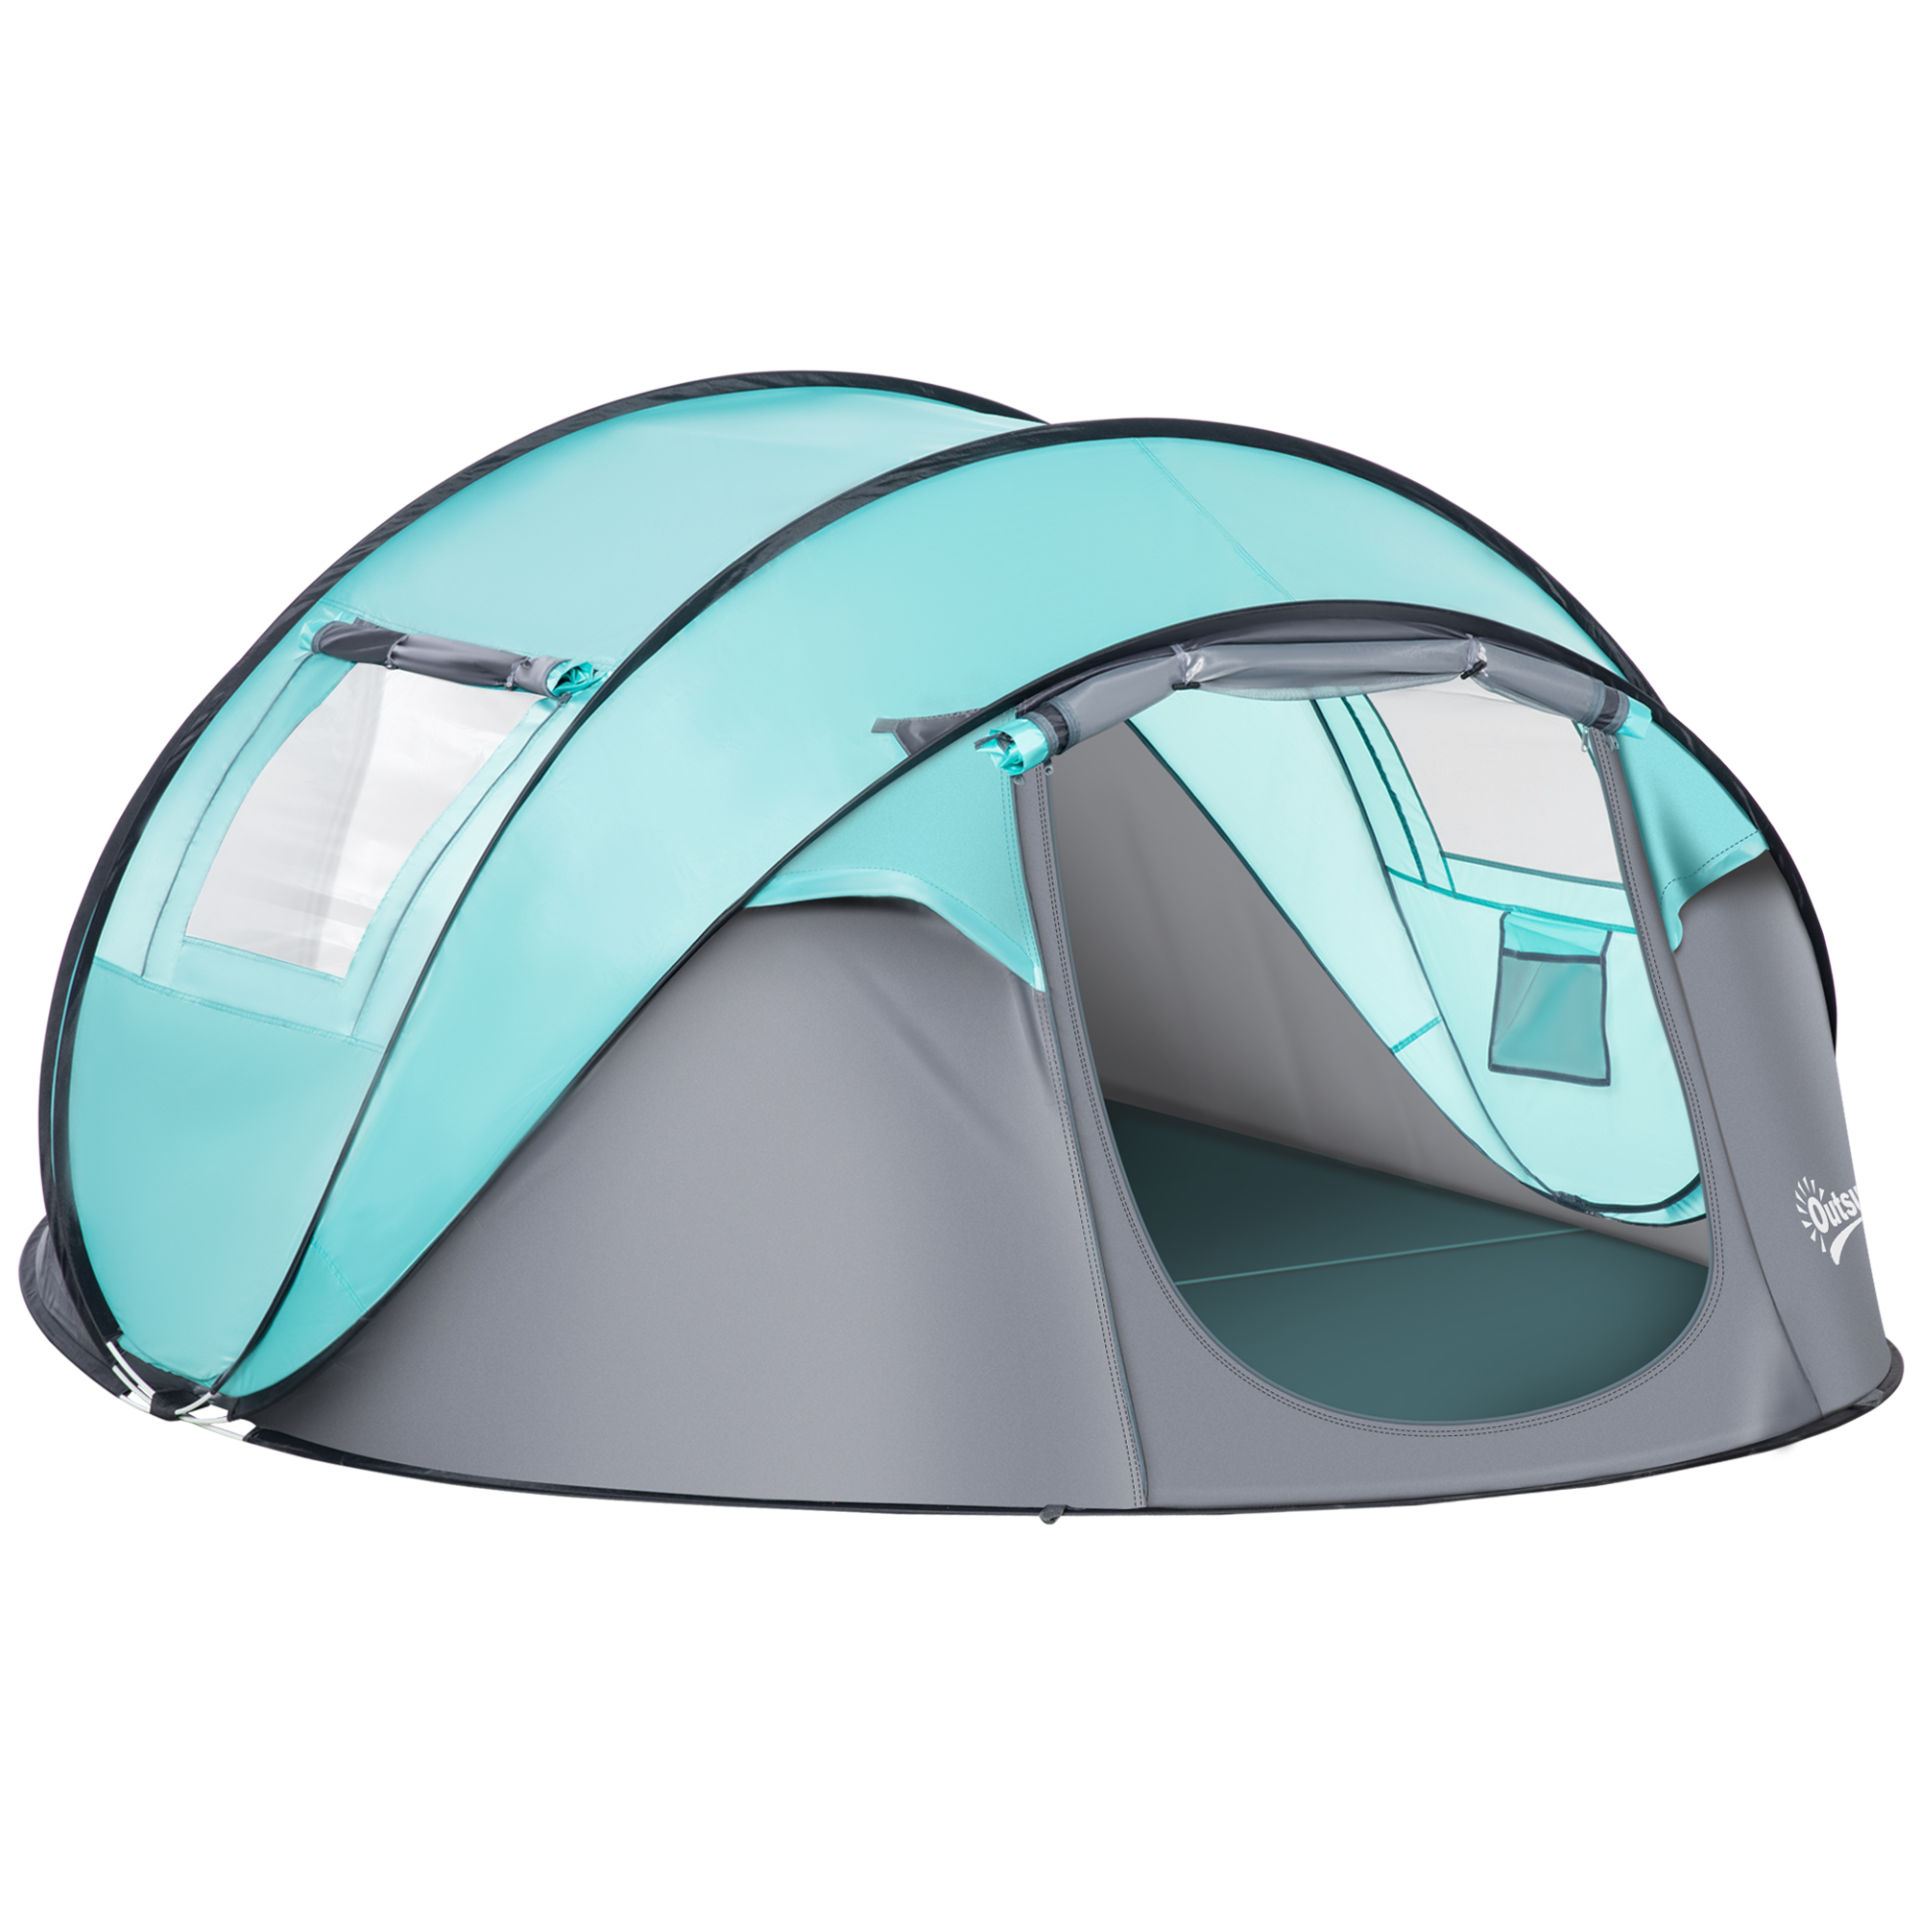 Outsunny 4 Person Pop Up Camping Tent 4 Man Tent Cosy Camping Co. Blue  